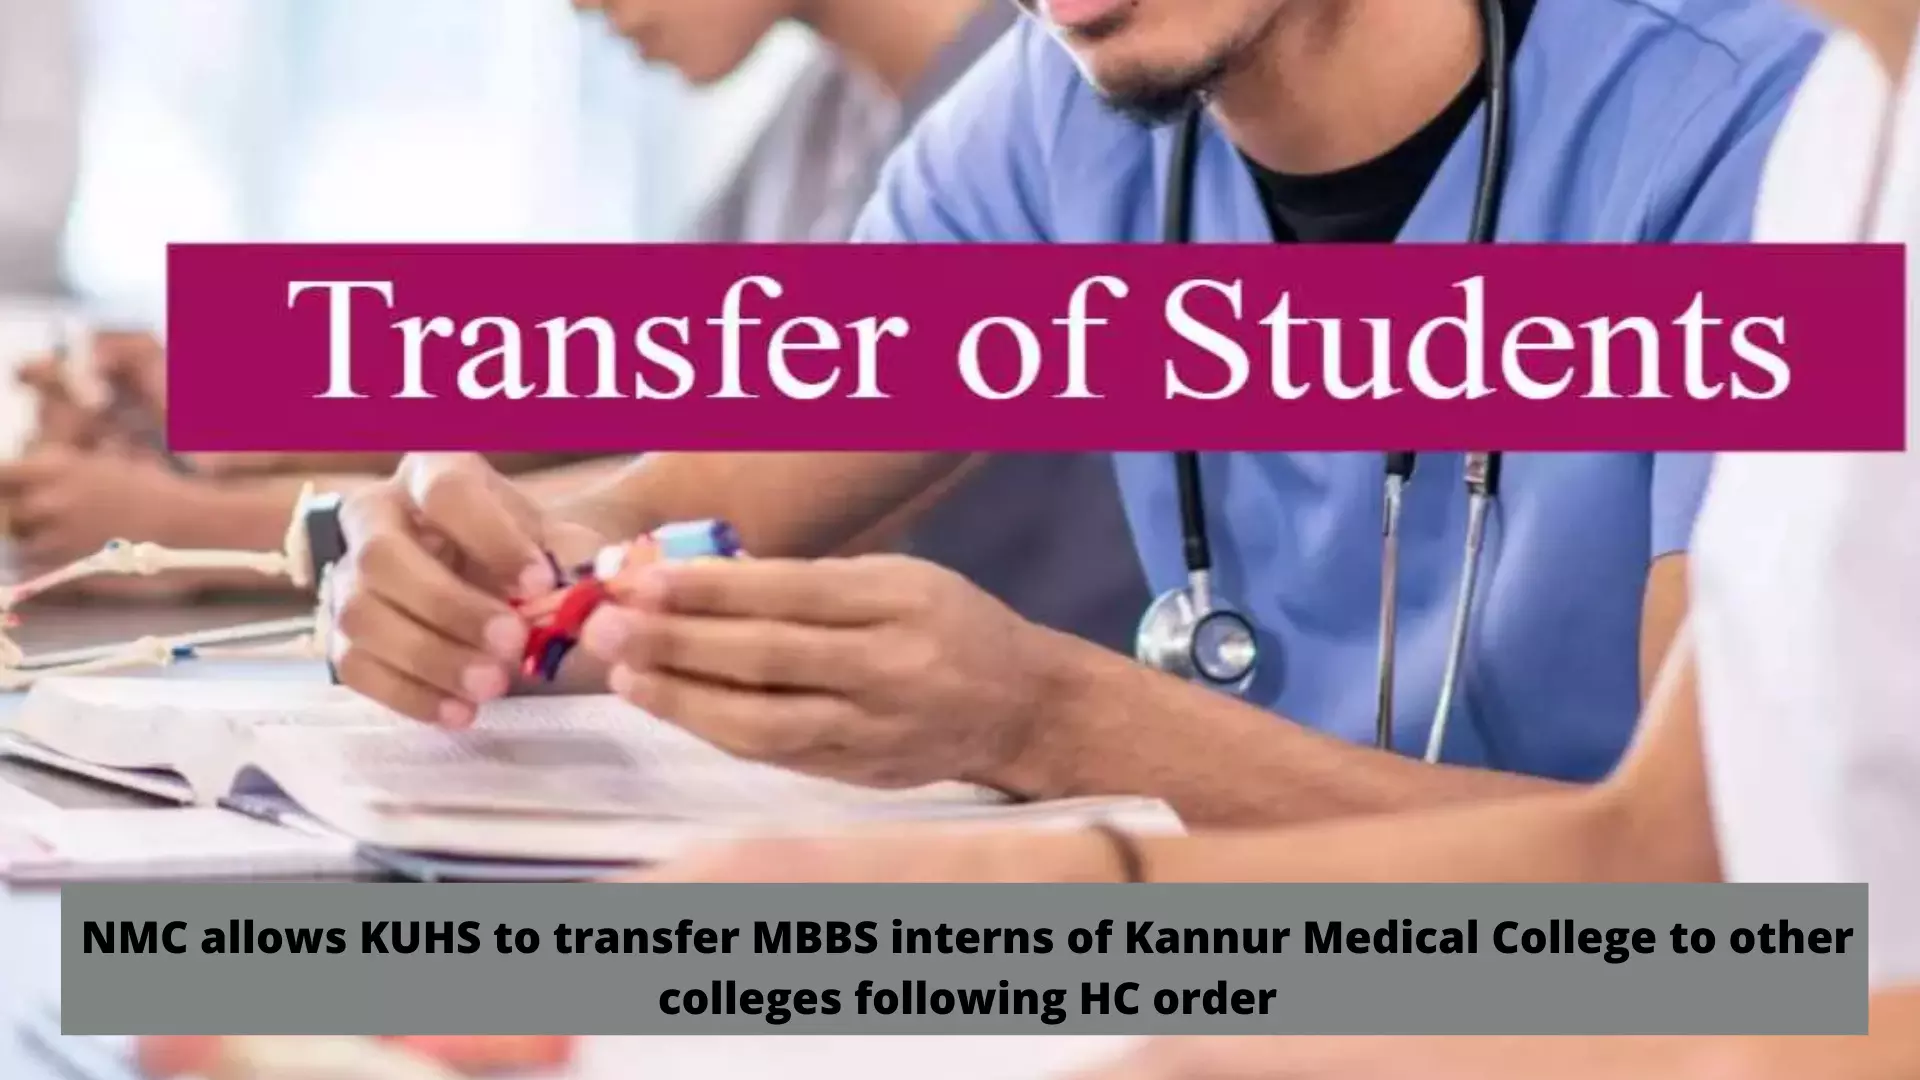 NMC allows KUHS to transfer MBBS interns of Kannur Medical College to other colleges